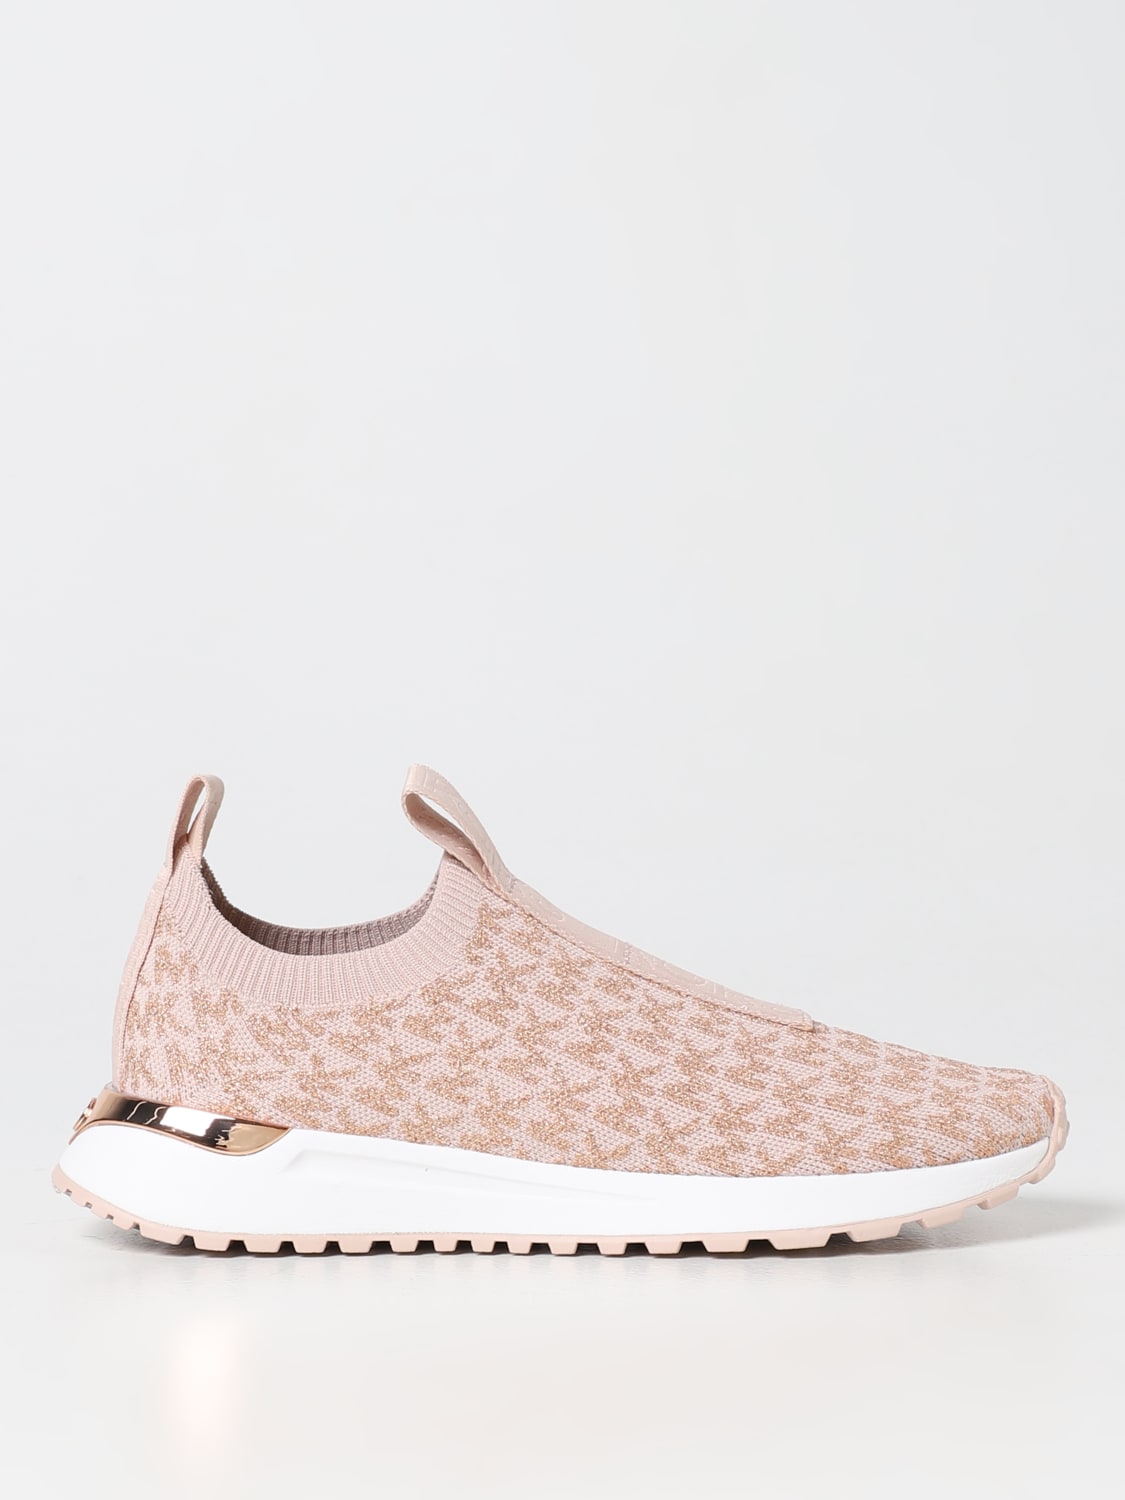 KORS: Michael Bodie Slip On sneakers in fabric with jacquard - Pink | Michael Kors sneakers 43R3BDFP1Y online on GIGLIO.COM